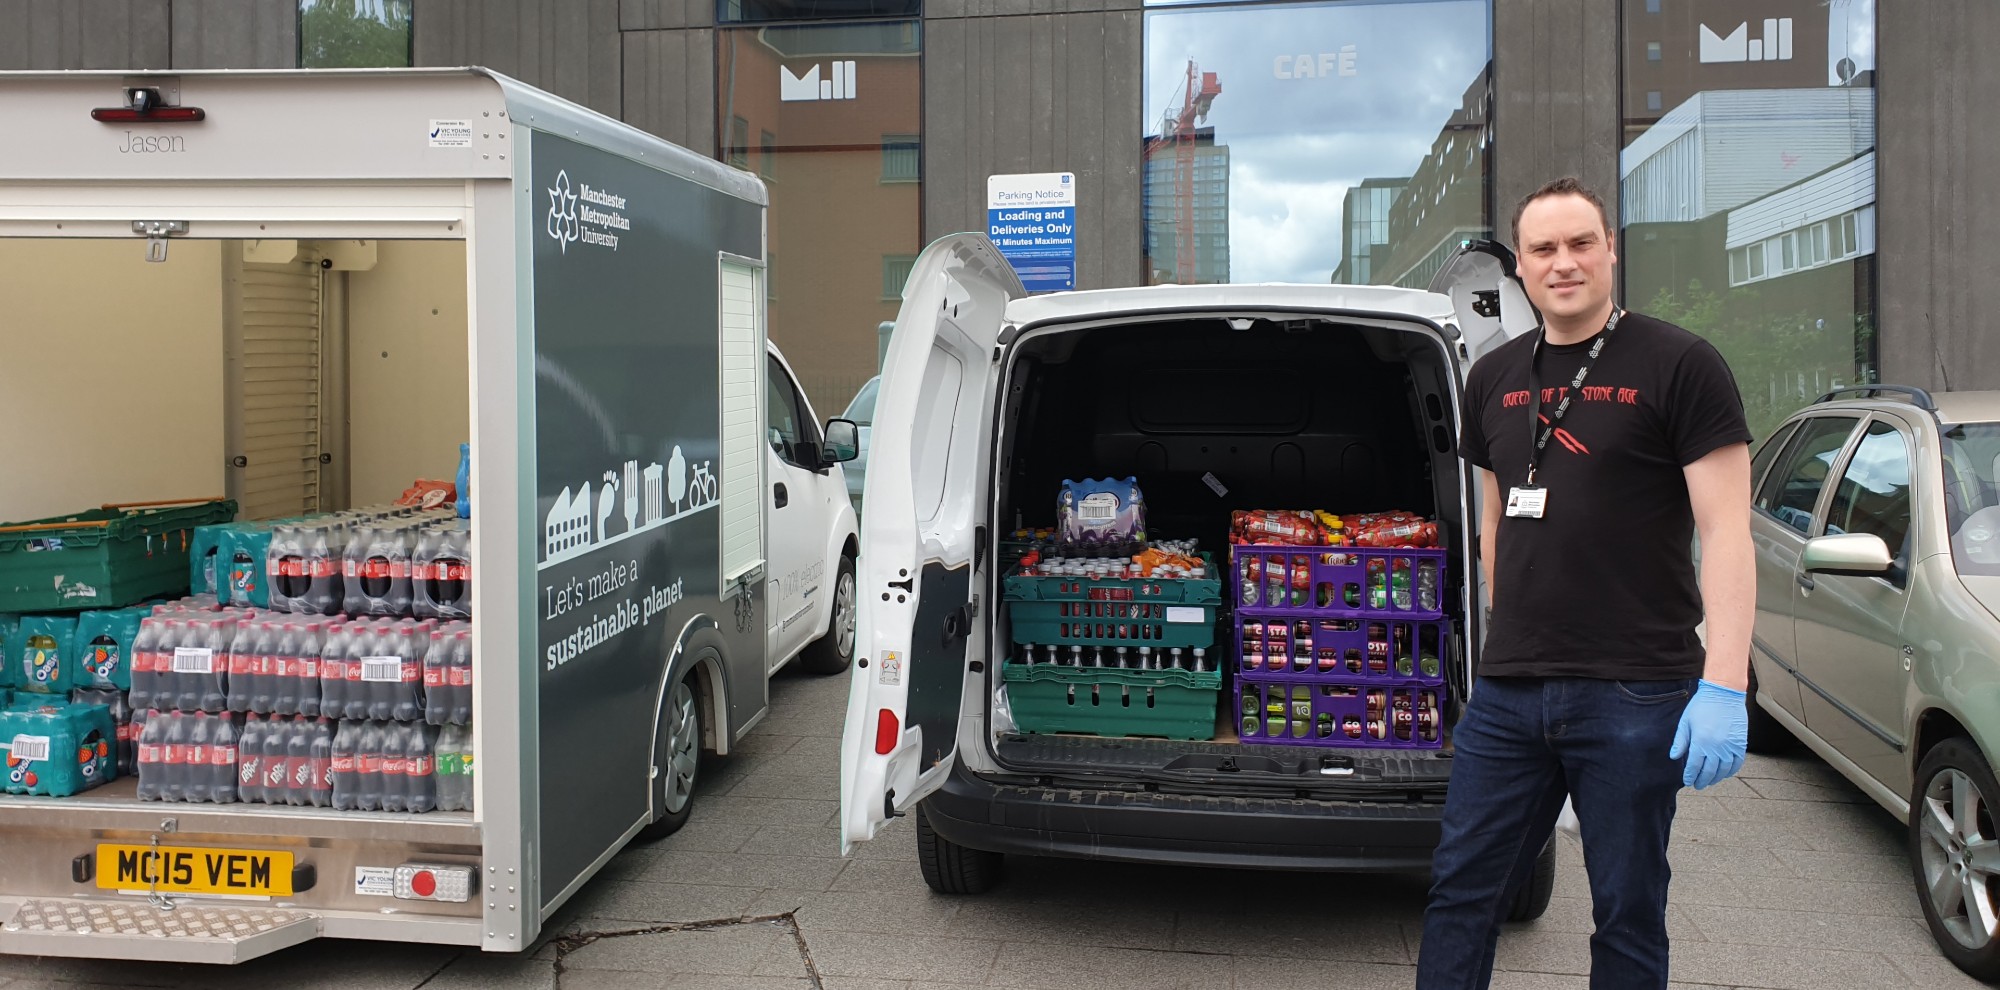 The catering team at Manchester Metropolitan donated a selection of food supplies to support vulnerable people in the community through the COVID-19 crisis.